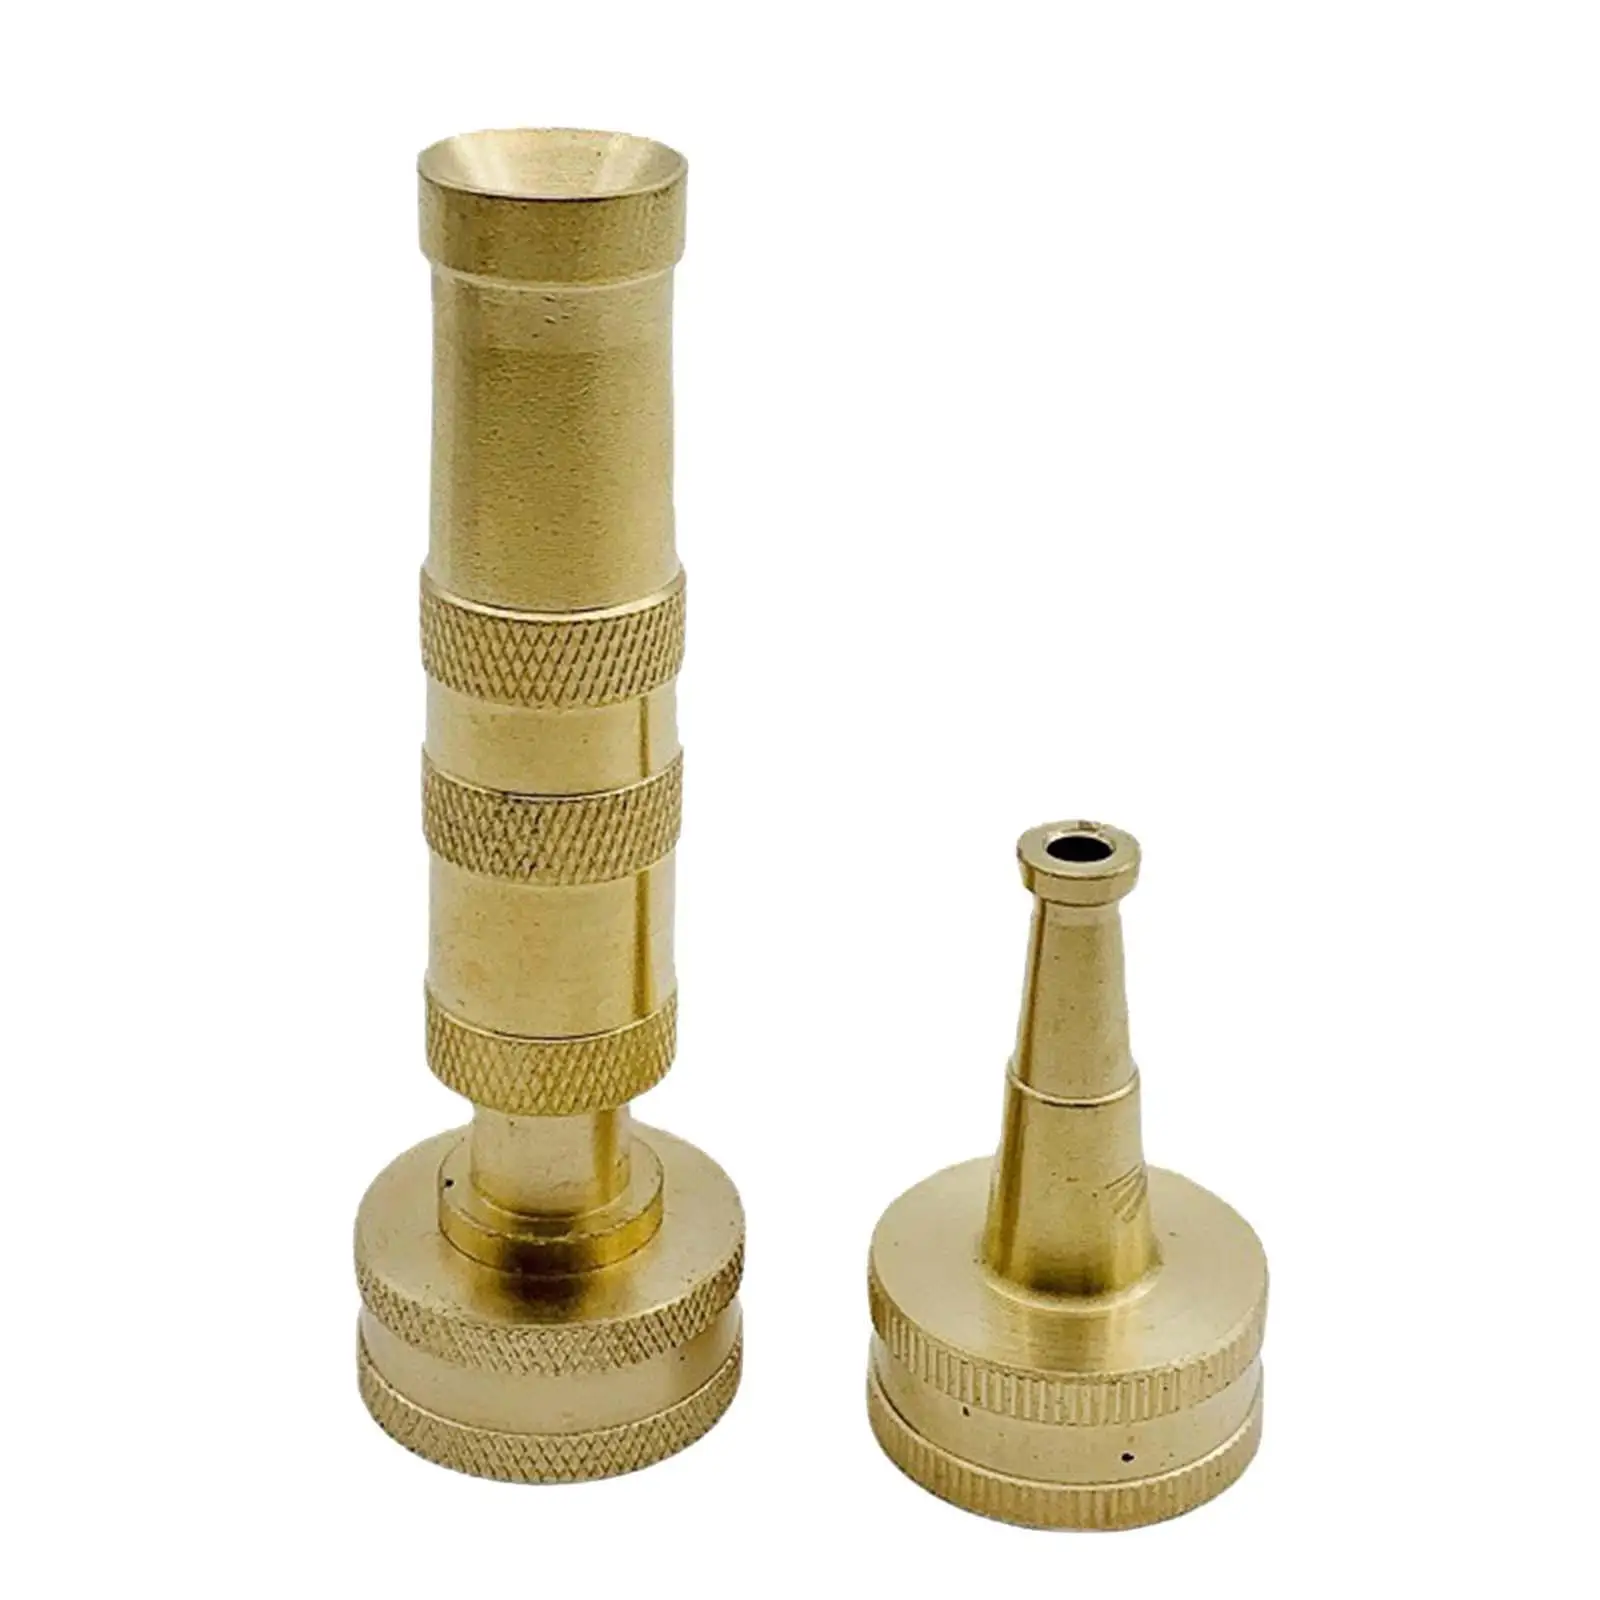 Solid Brass Hose Nozzle Pressure Spray Attachment for Garden Metal Twist Hose Nozzle for Flower Yard Plants House Watering